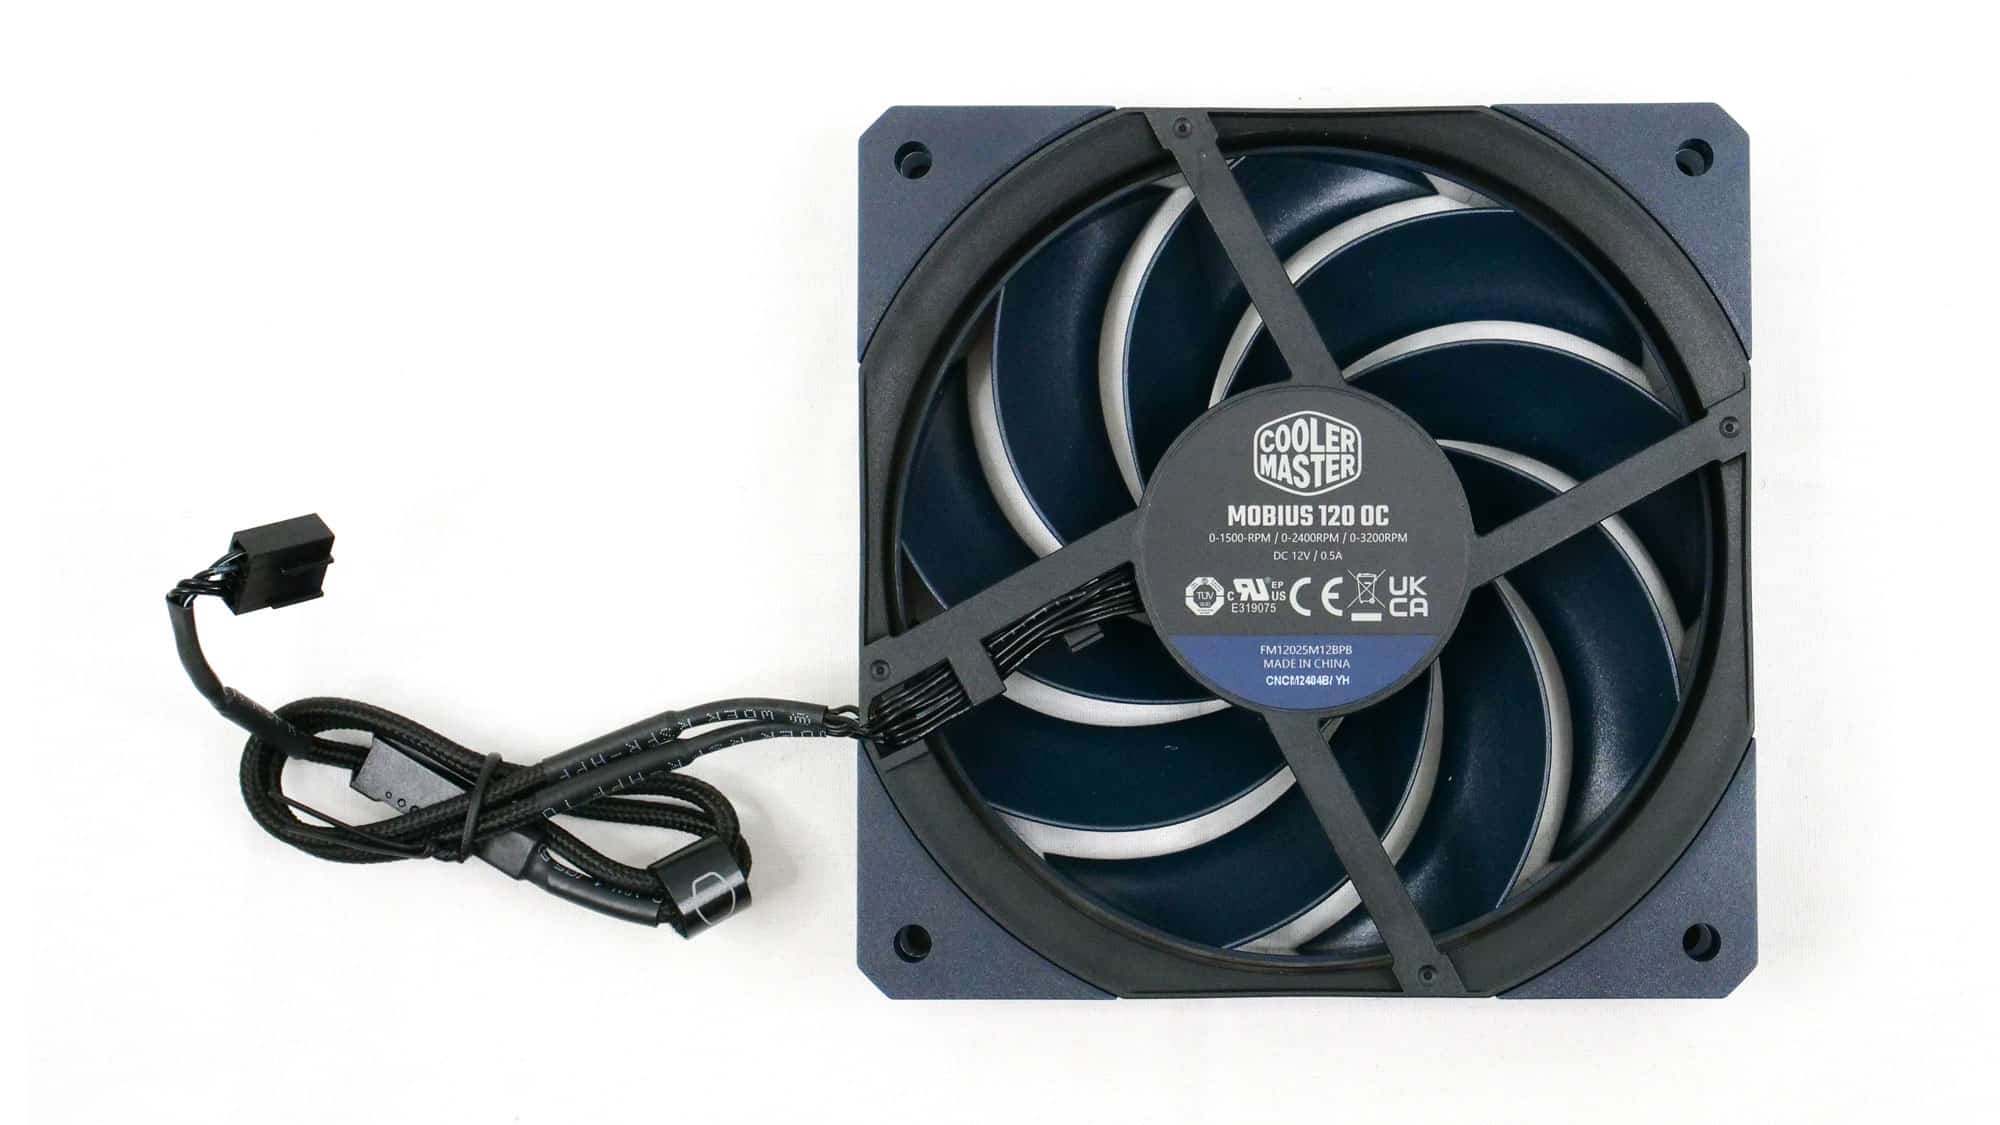 Cooler Master Mobius 120 Fan Review